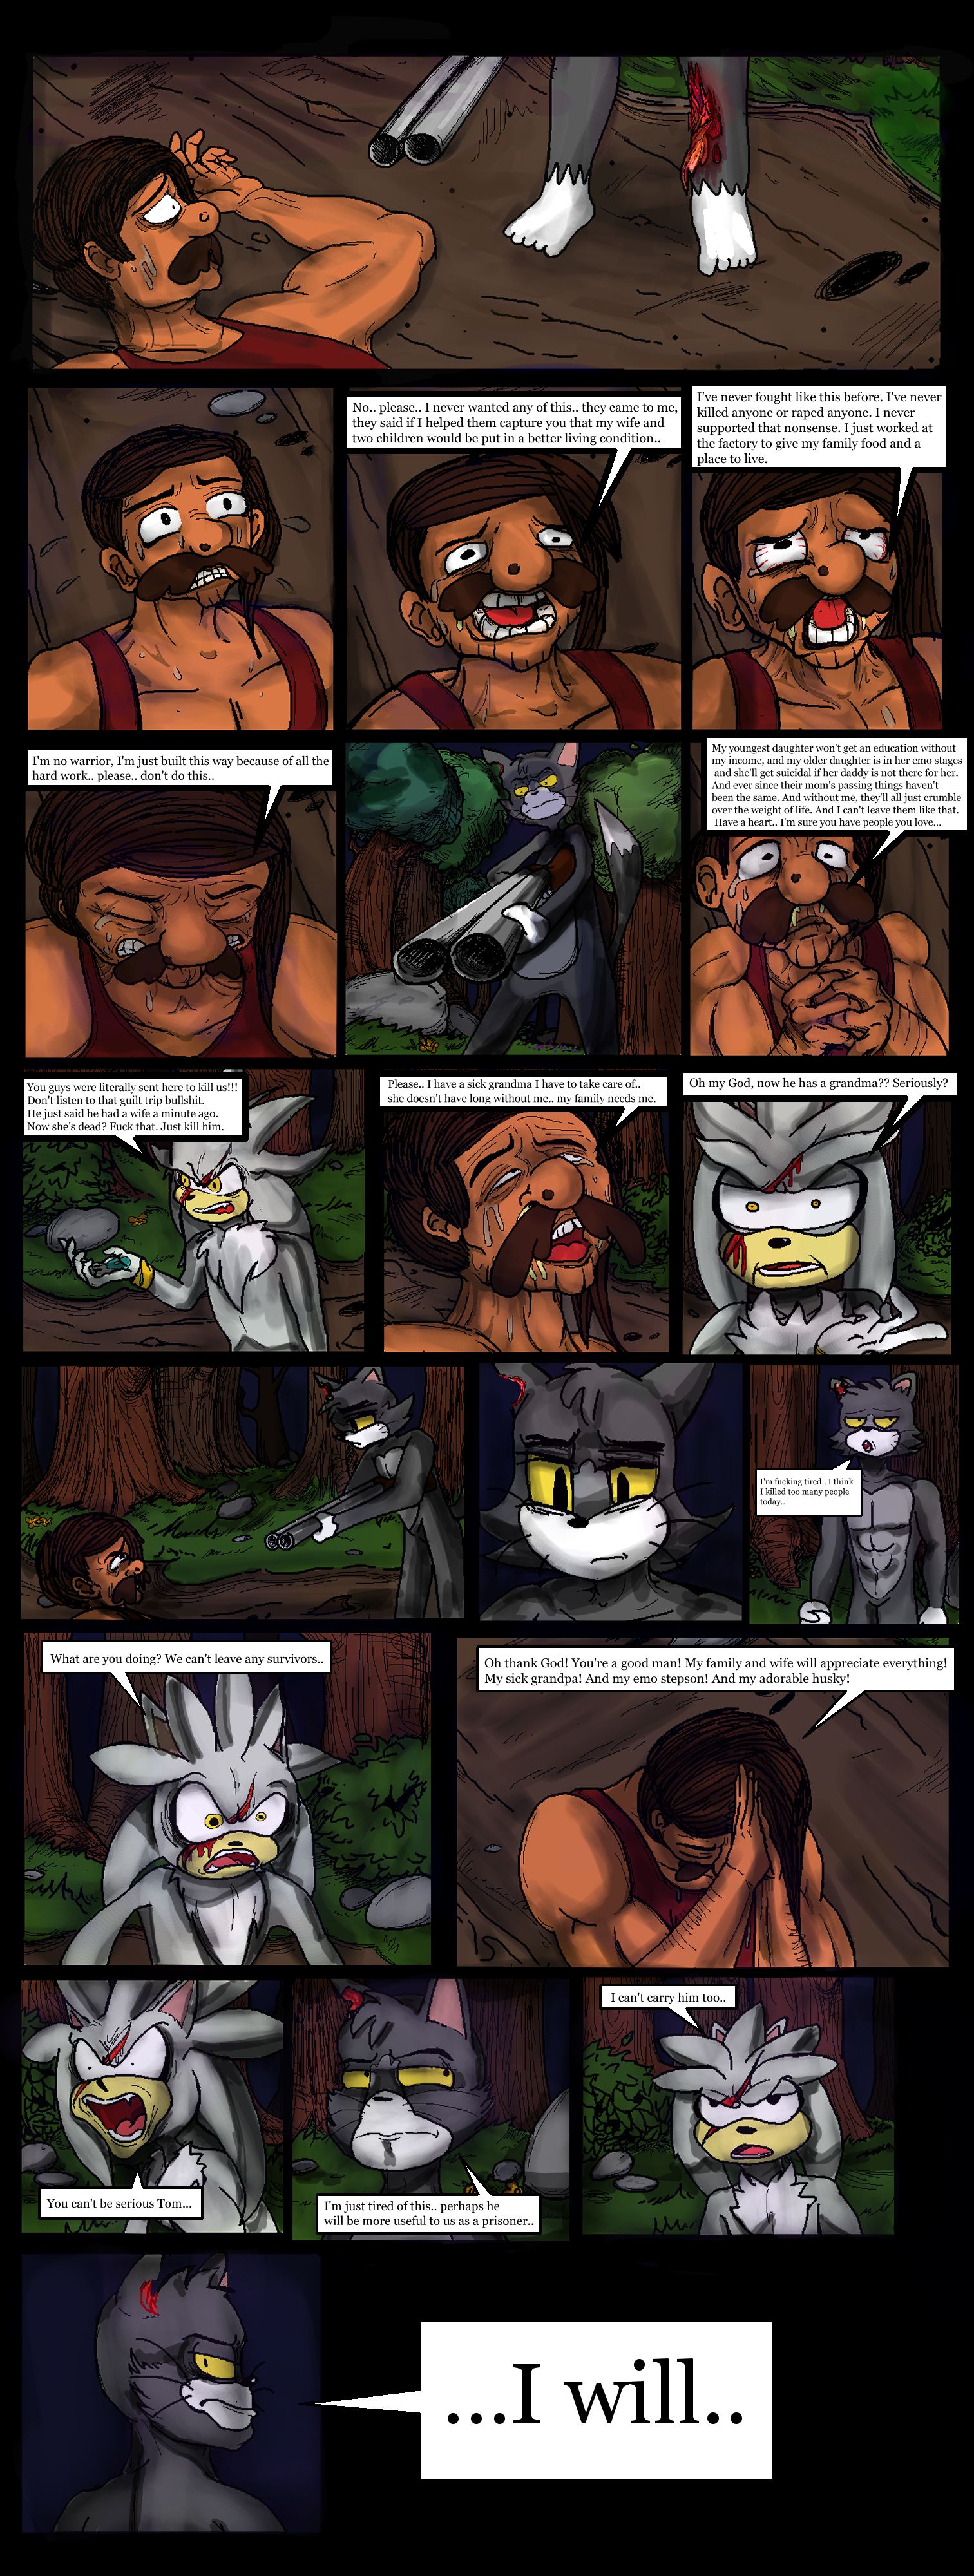 ch25.5/pg24.png. If you're seeing this, enable images. Or, perhaps we have a website issue. Try refreshing, if unsuccessful email c@commodorian.org with a detailed description of how you got here.